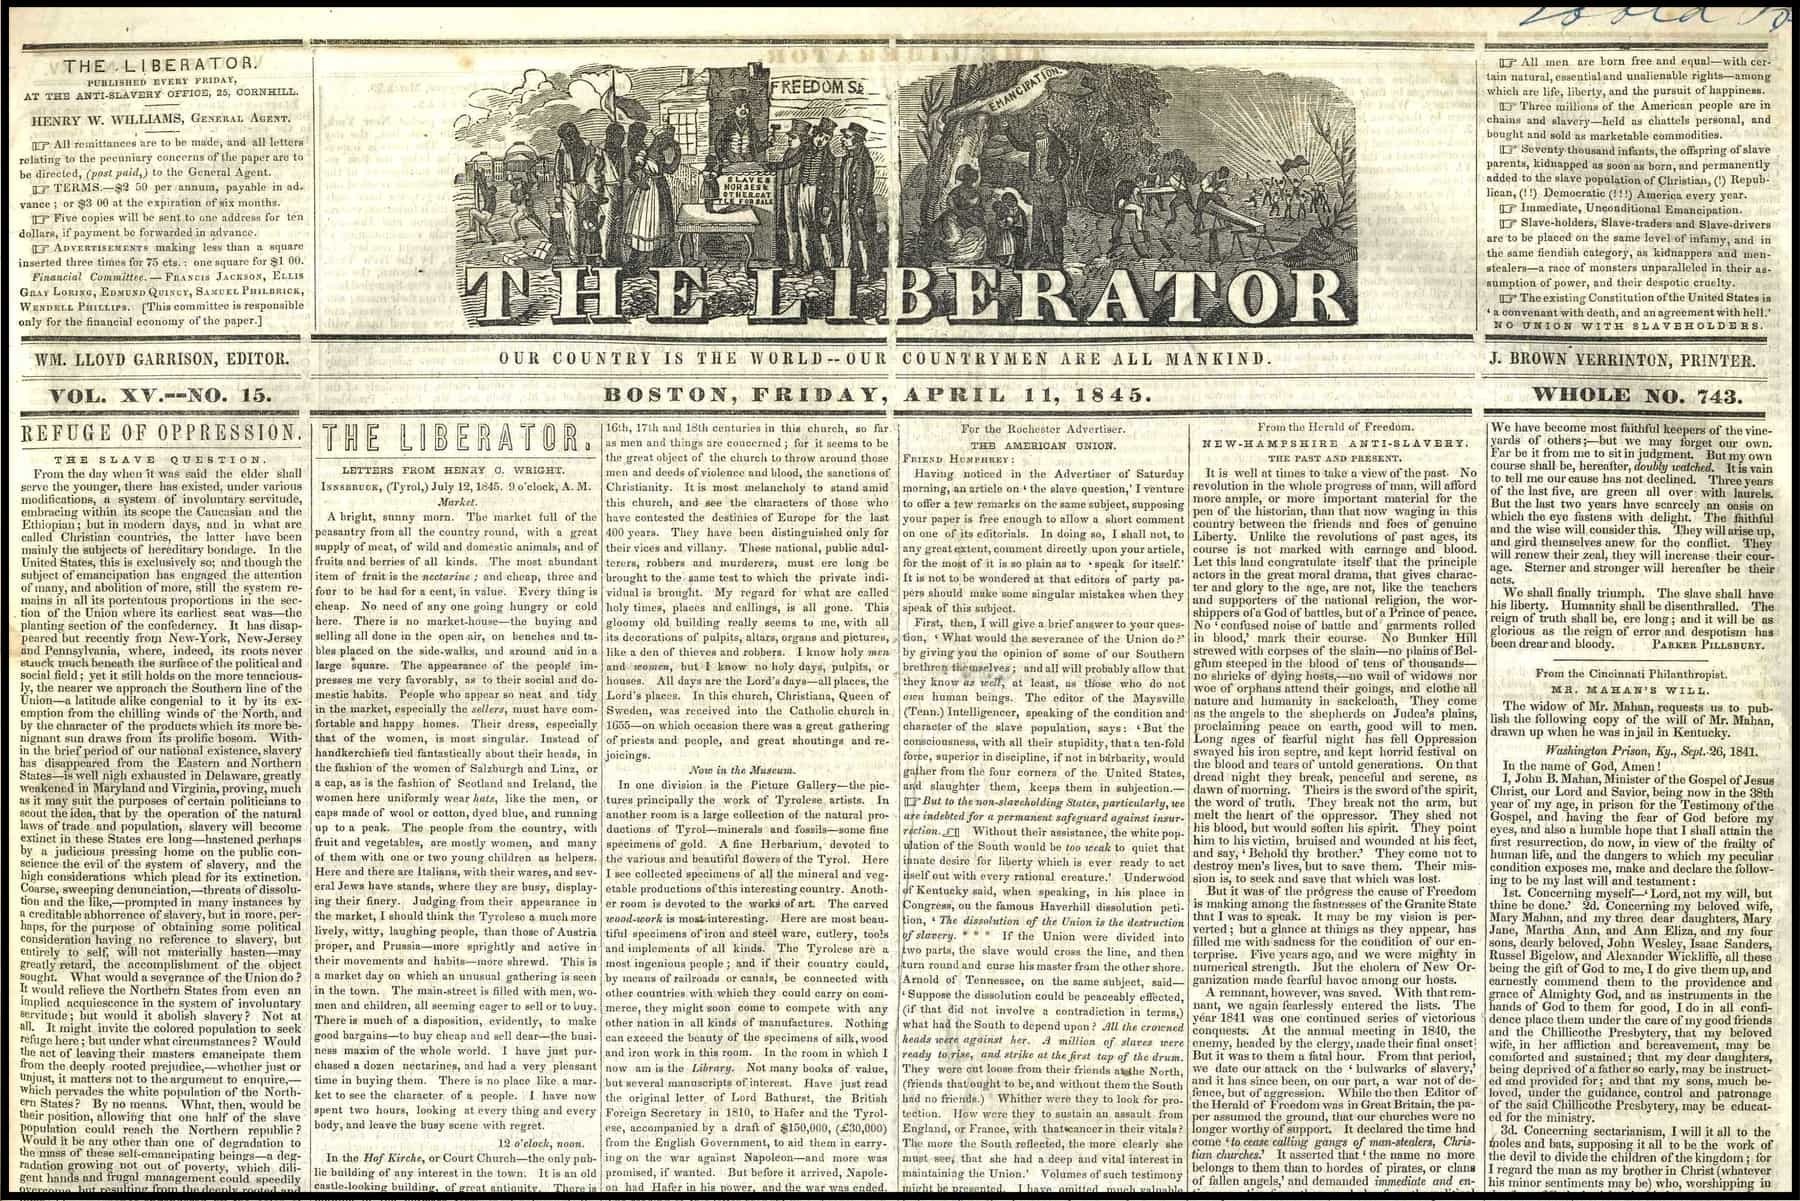 Front page of "The Liberator" April 11, 1845